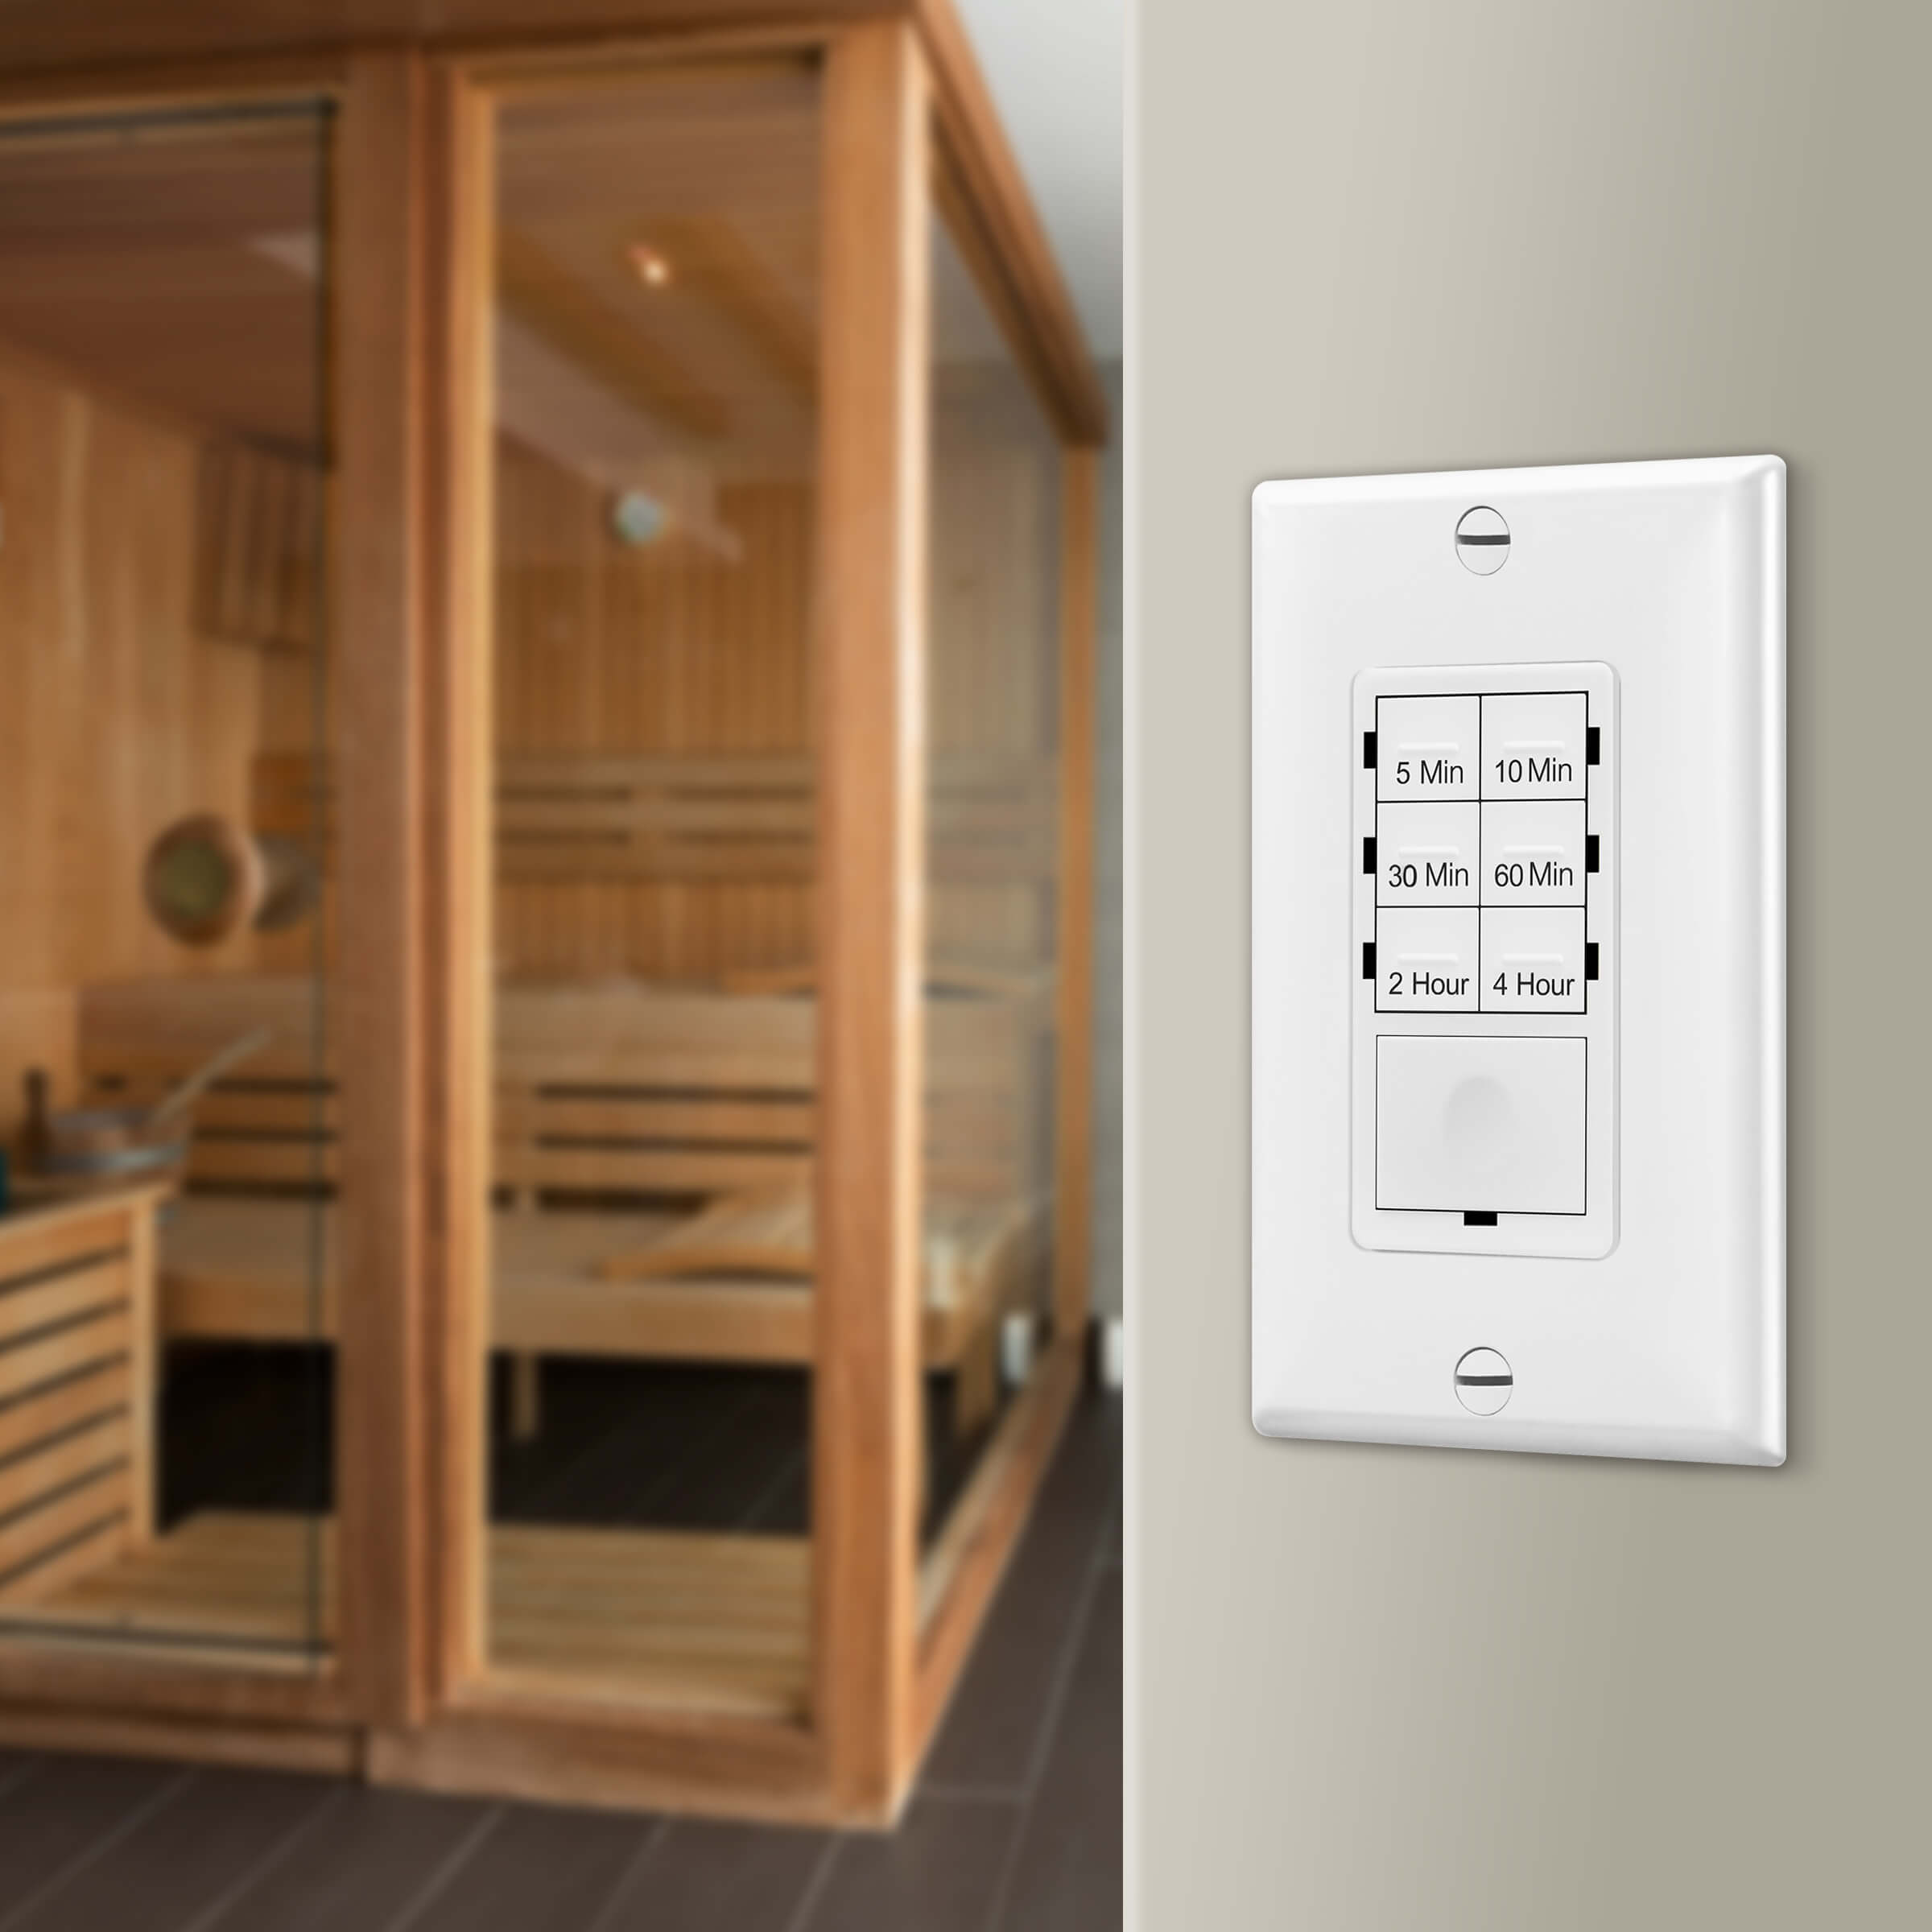 4-Hour Countdown Timer Switch for Bathroom Fans, Heaters, Lights